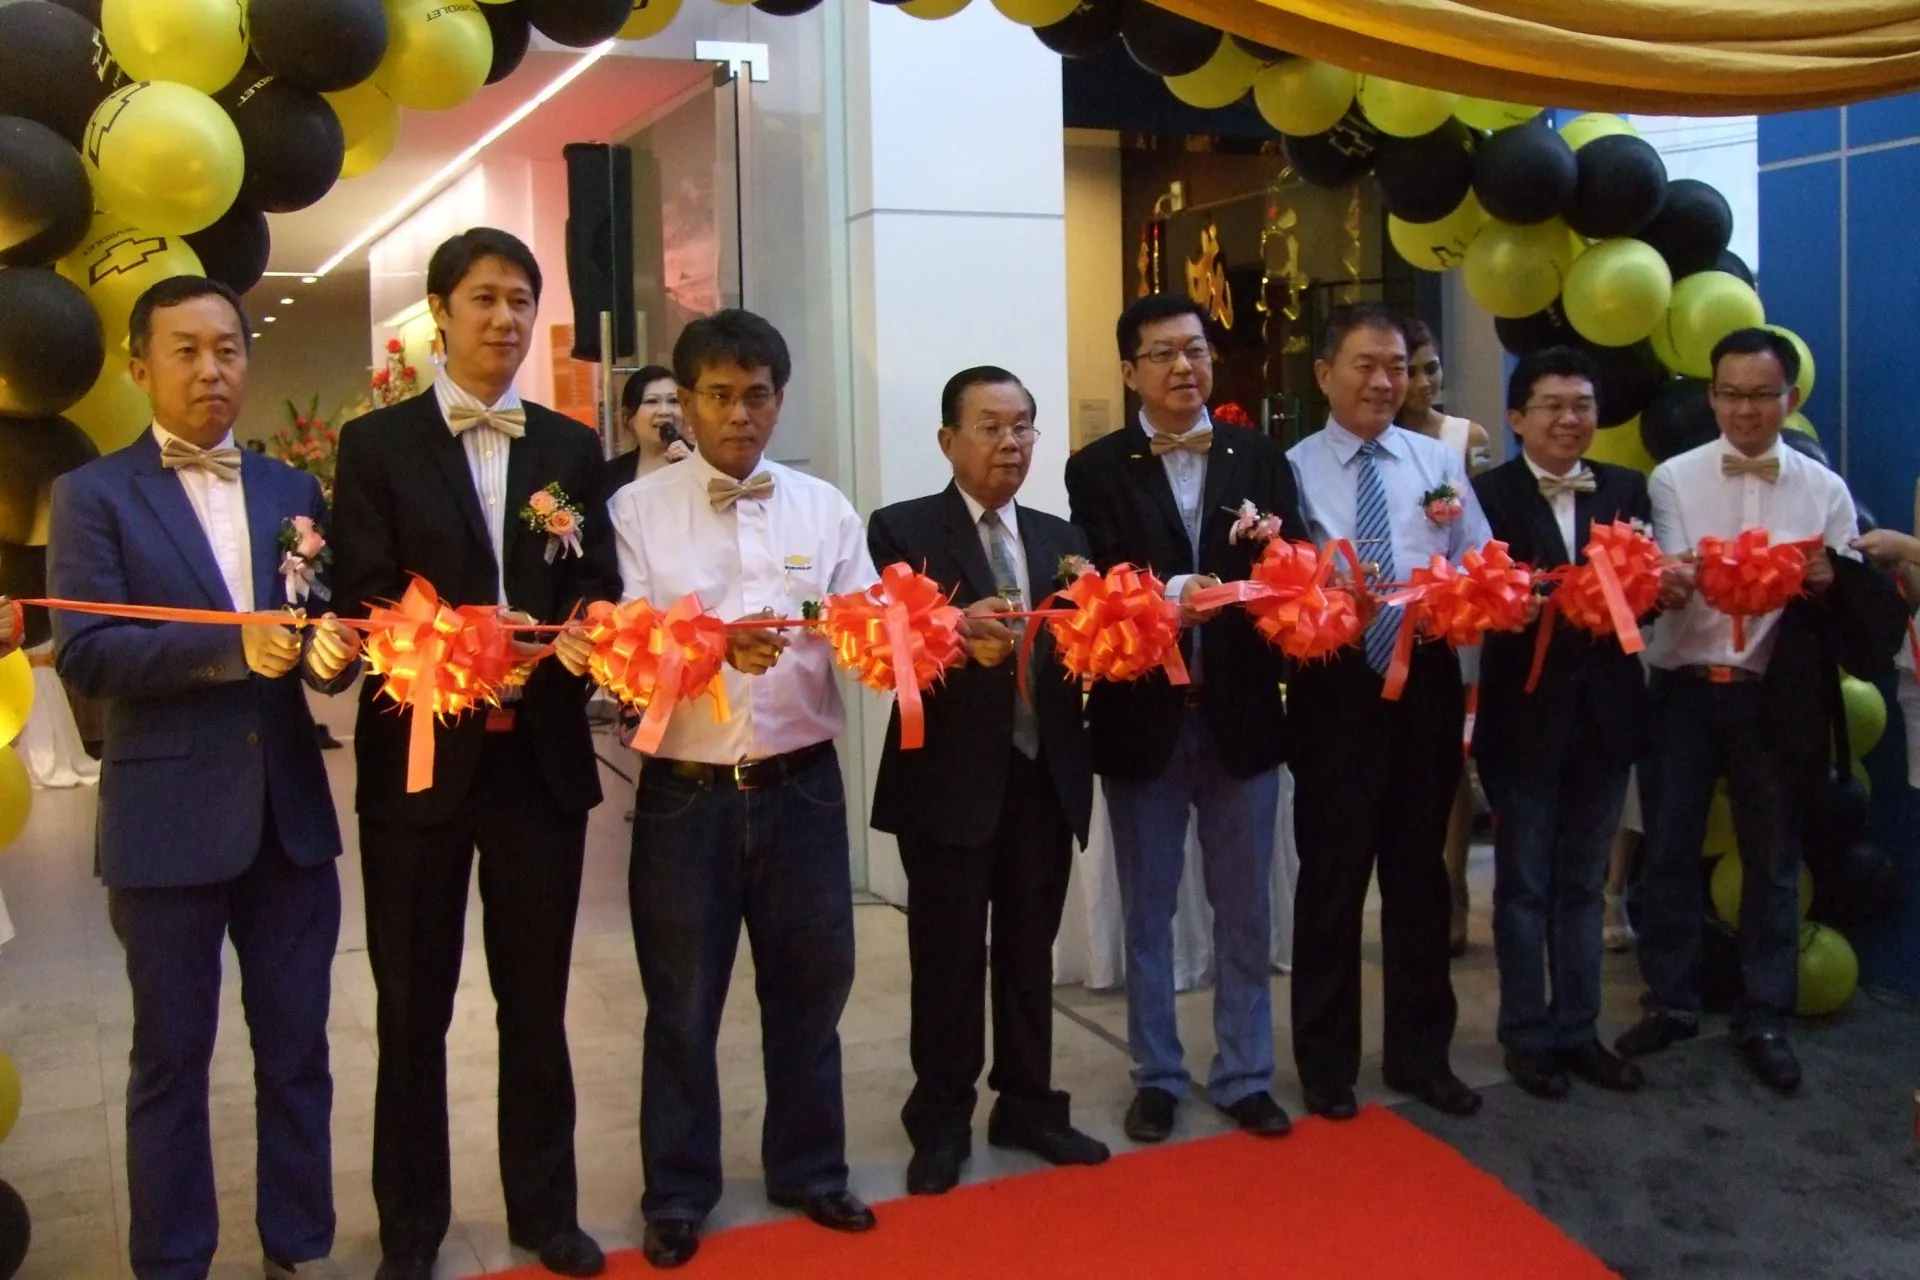 (L-R) Mr Ooi Choon Lai (DIRECTOR),Mr Timothy Liauw (General Motor Country Manager), Mr Norzahid Zahudi (Chief Operating Officer NAZA Quest Sdn Bhd), Dato’ Ooi Ting Chong (Chairman Chye Seng Group of companies), Mr Ooi Choon Peng (Principal Dealer cum Managing Director of Ooi Ting Chong Holdings Sdn Bhd), Mr Ooi Choon Lim (Director) and Mr Ooi Choon Yaw (Director).